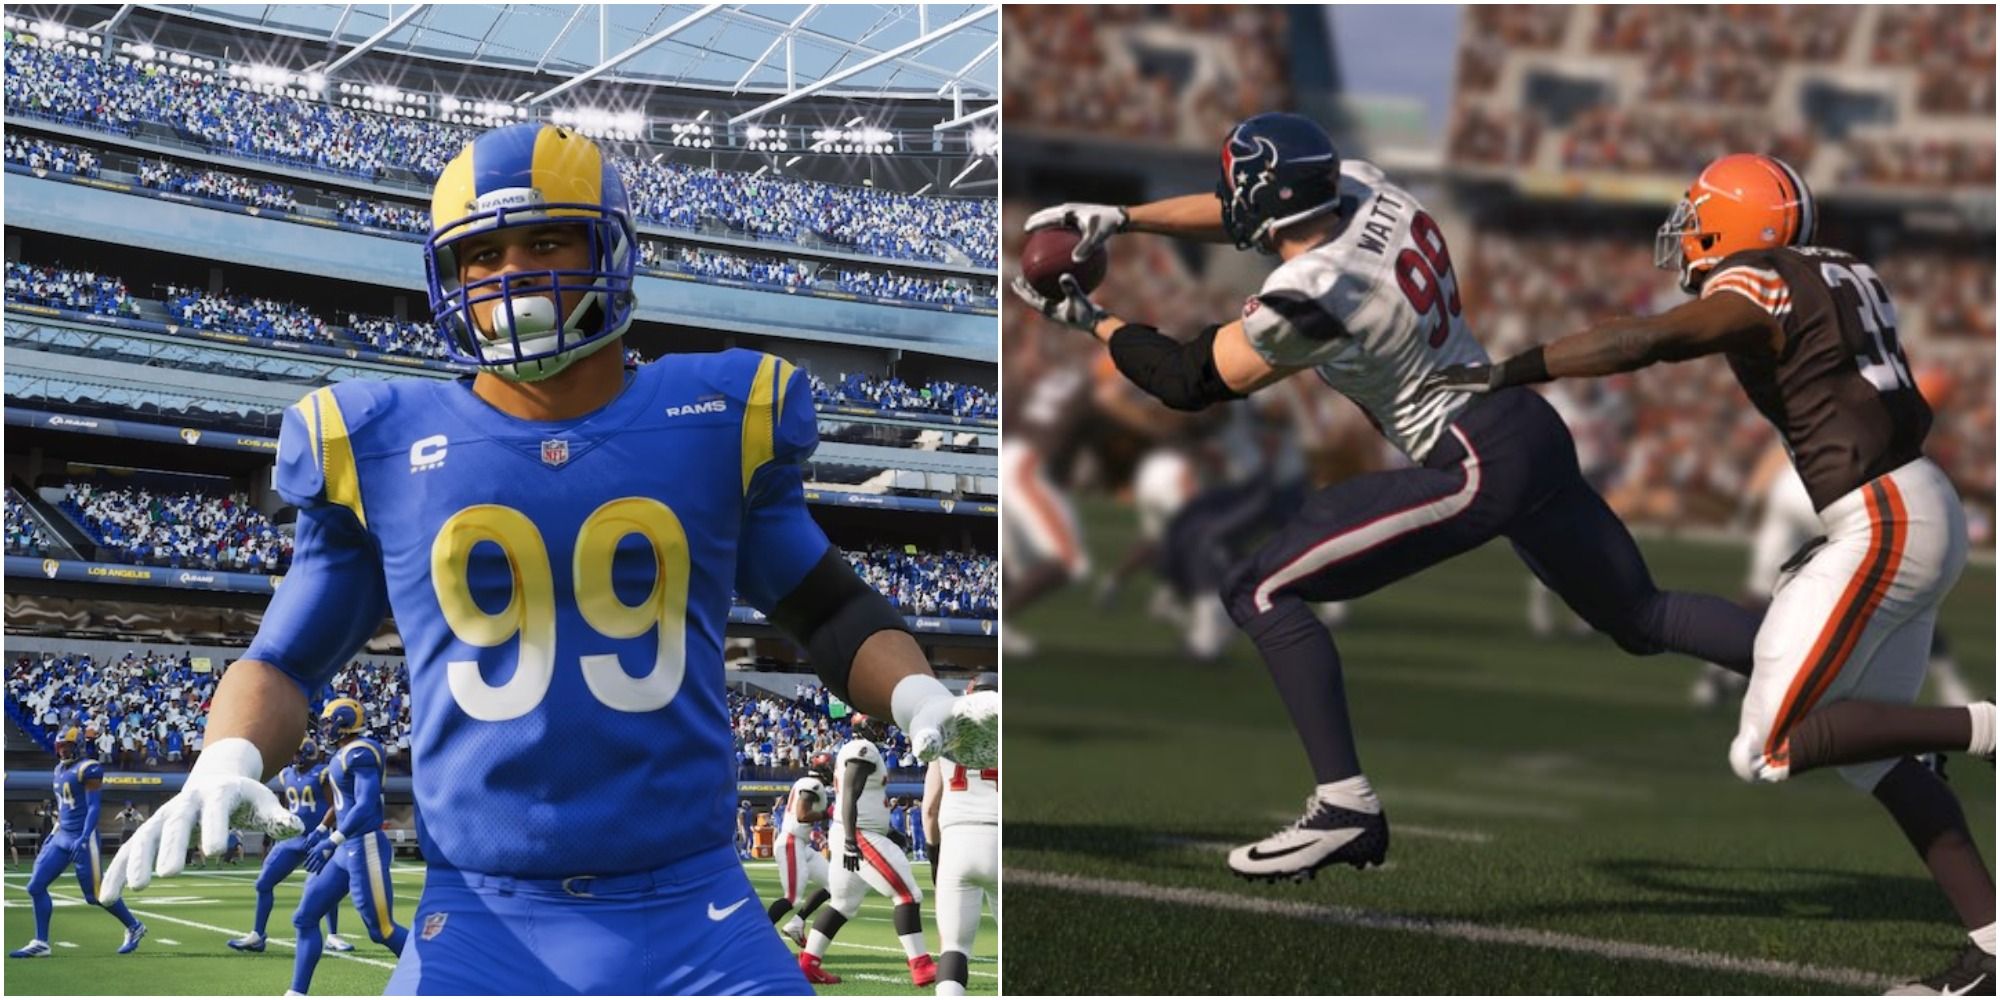 Madden NFL 22 Top Rated DLs Collage JJ Watt And Aaron Donald